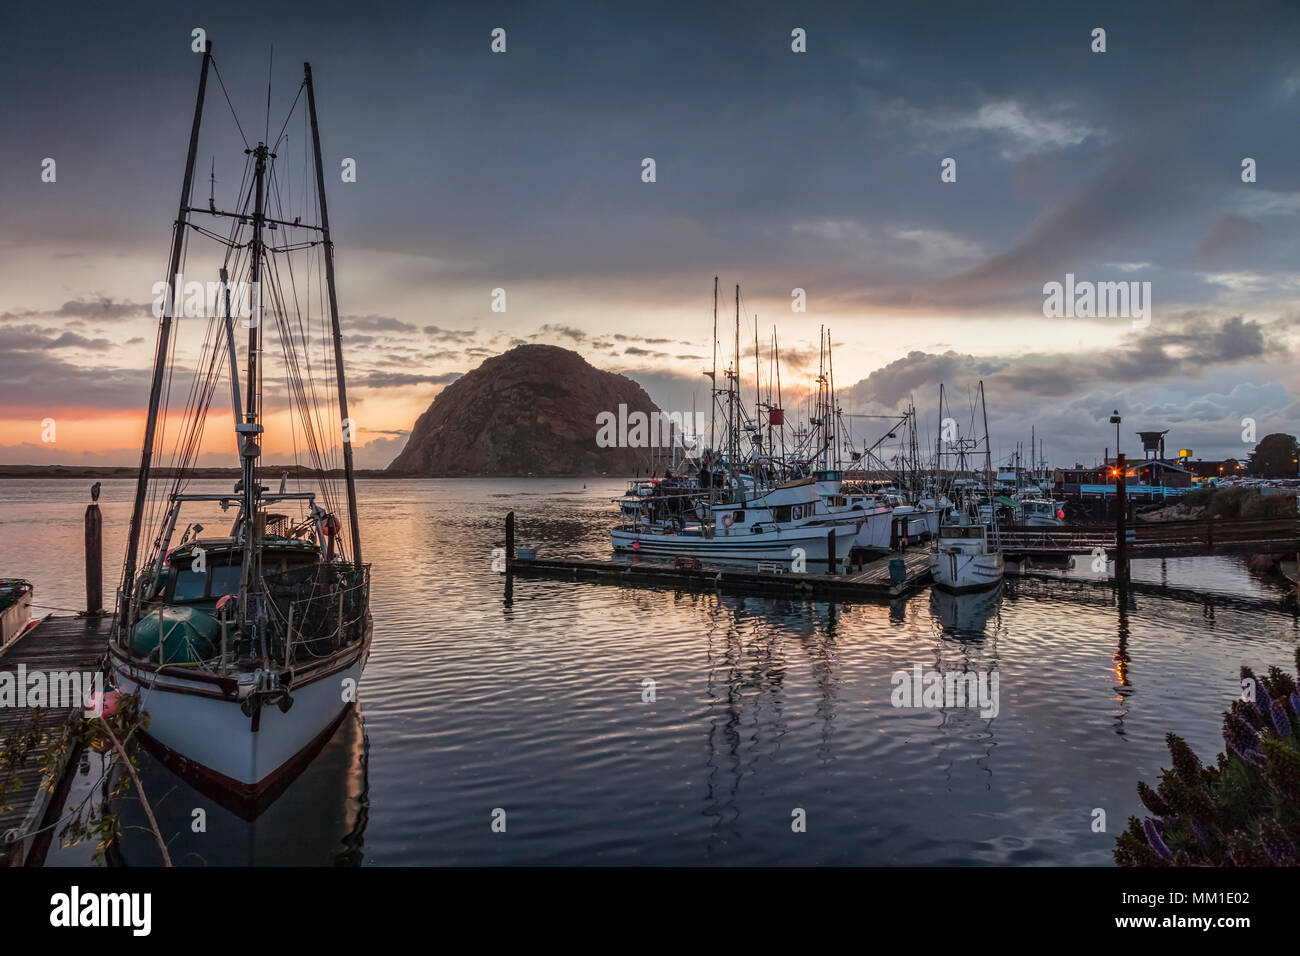 Evening at the harbour of Morro Bay, California. Stock Photo